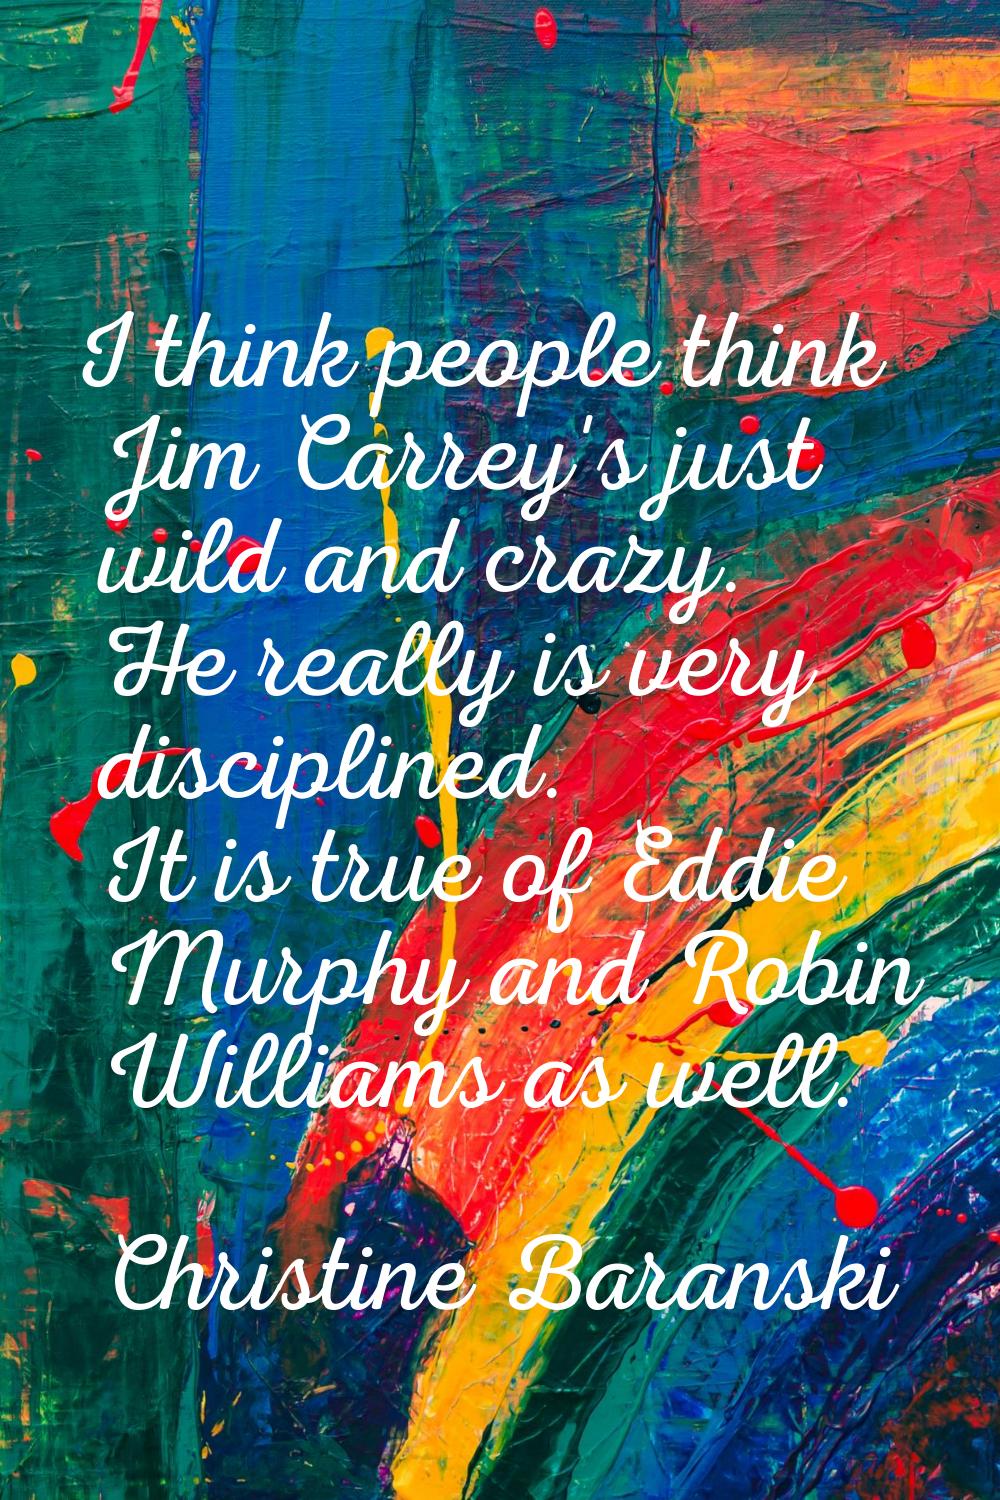 I think people think Jim Carrey's just wild and crazy. He really is very disciplined. It is true of